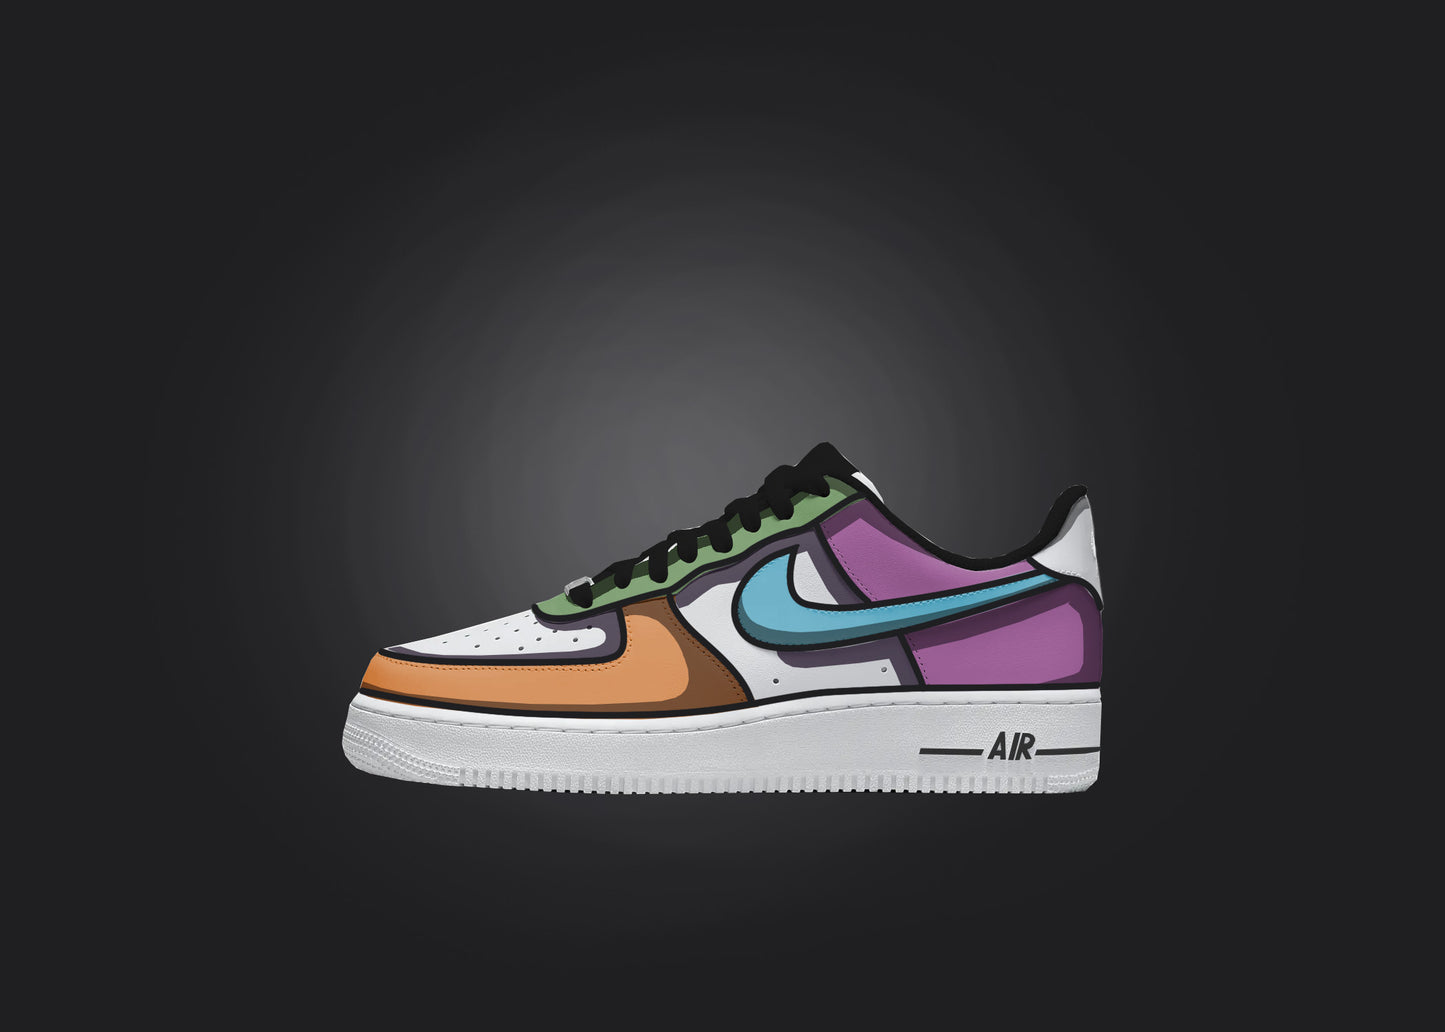 A single Custom Air Force 1 sneaker featuring a colorful mix of orange, green, blue, and purple shades, highlighted against a black backdrop.